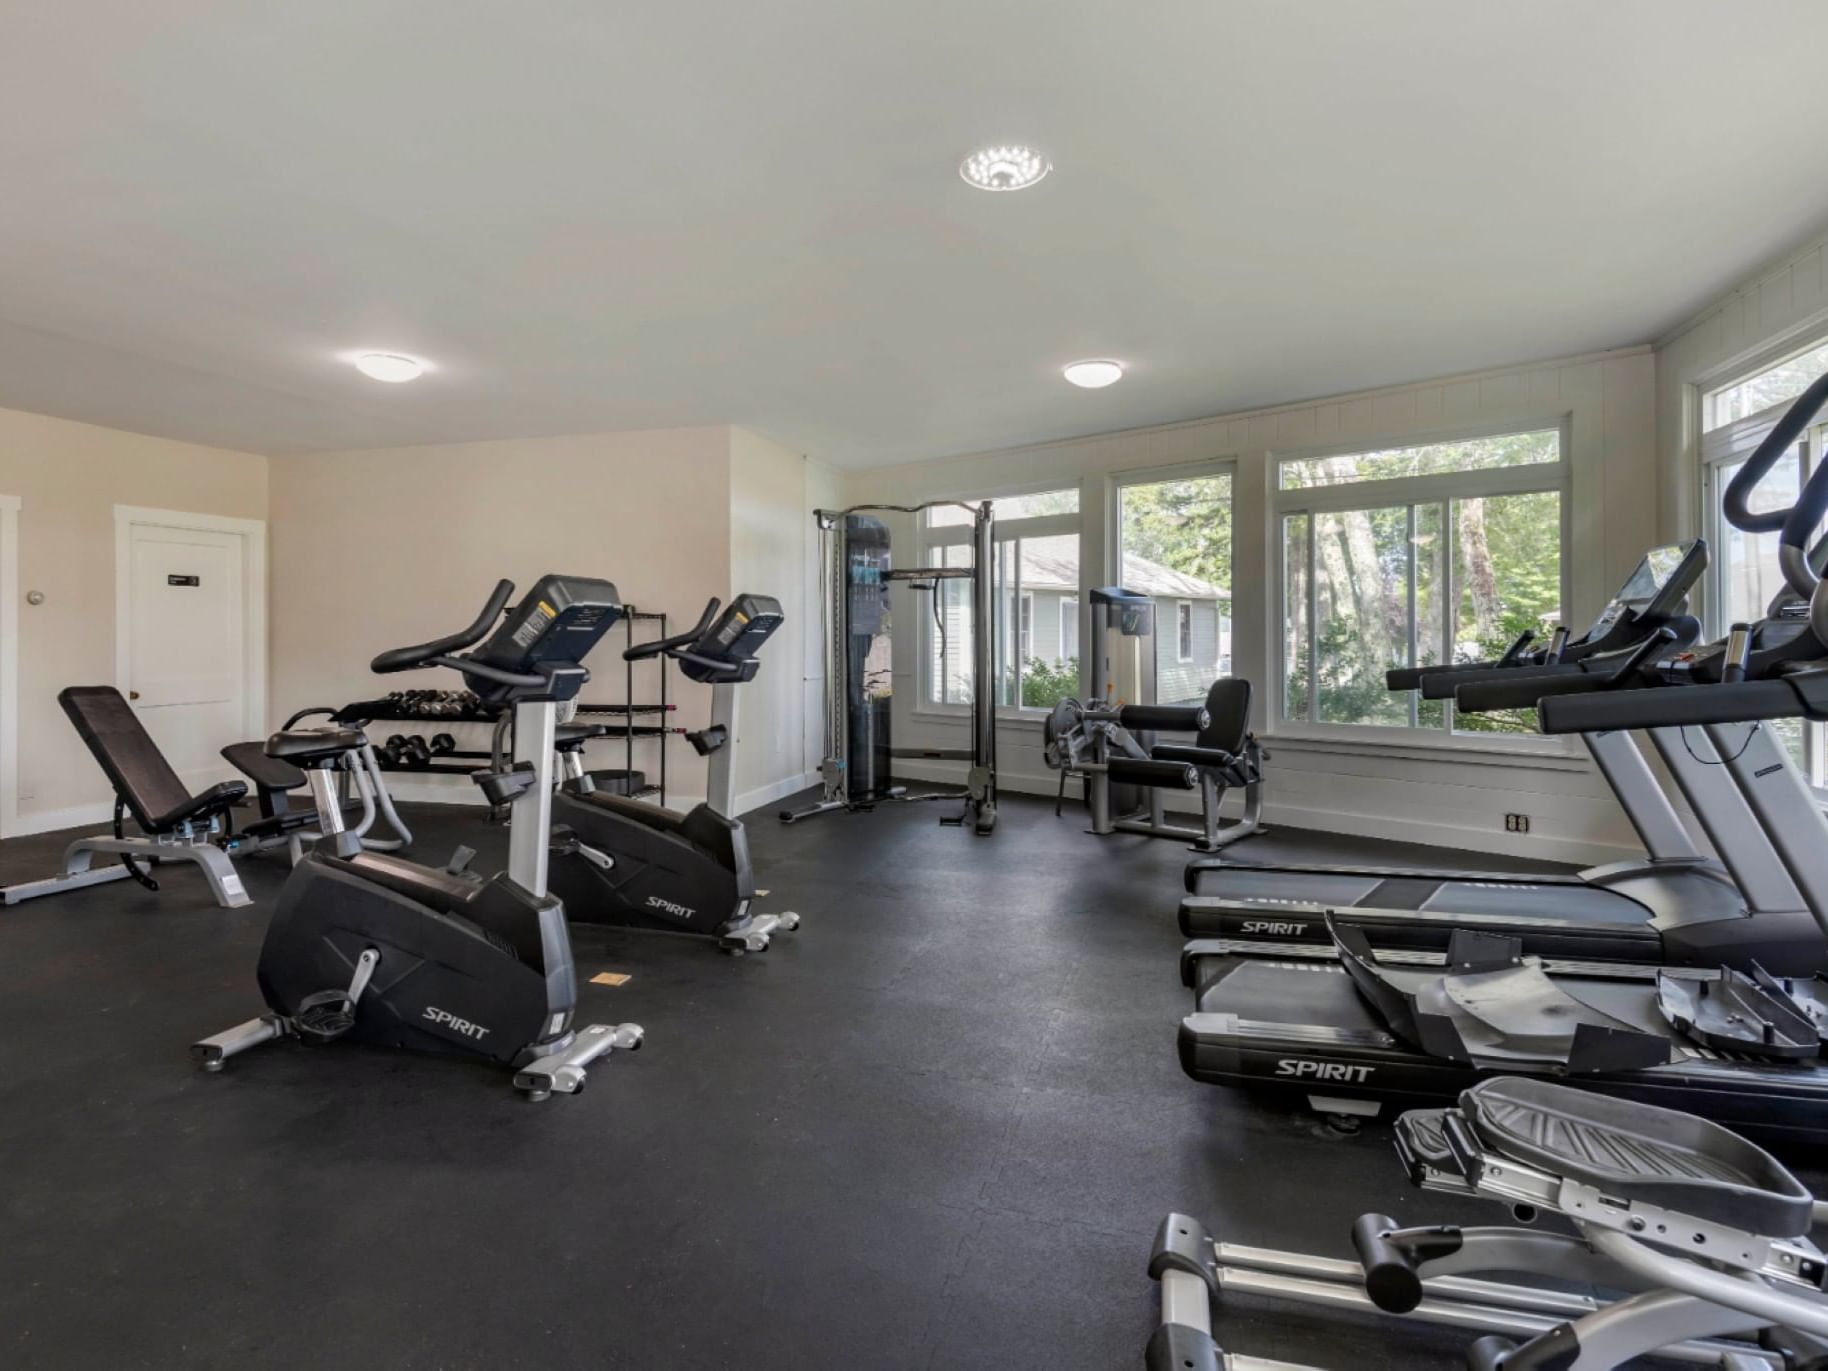 Exercise machines & gym equipment in the Fitness center at The Bethel Inn Resort & Suites